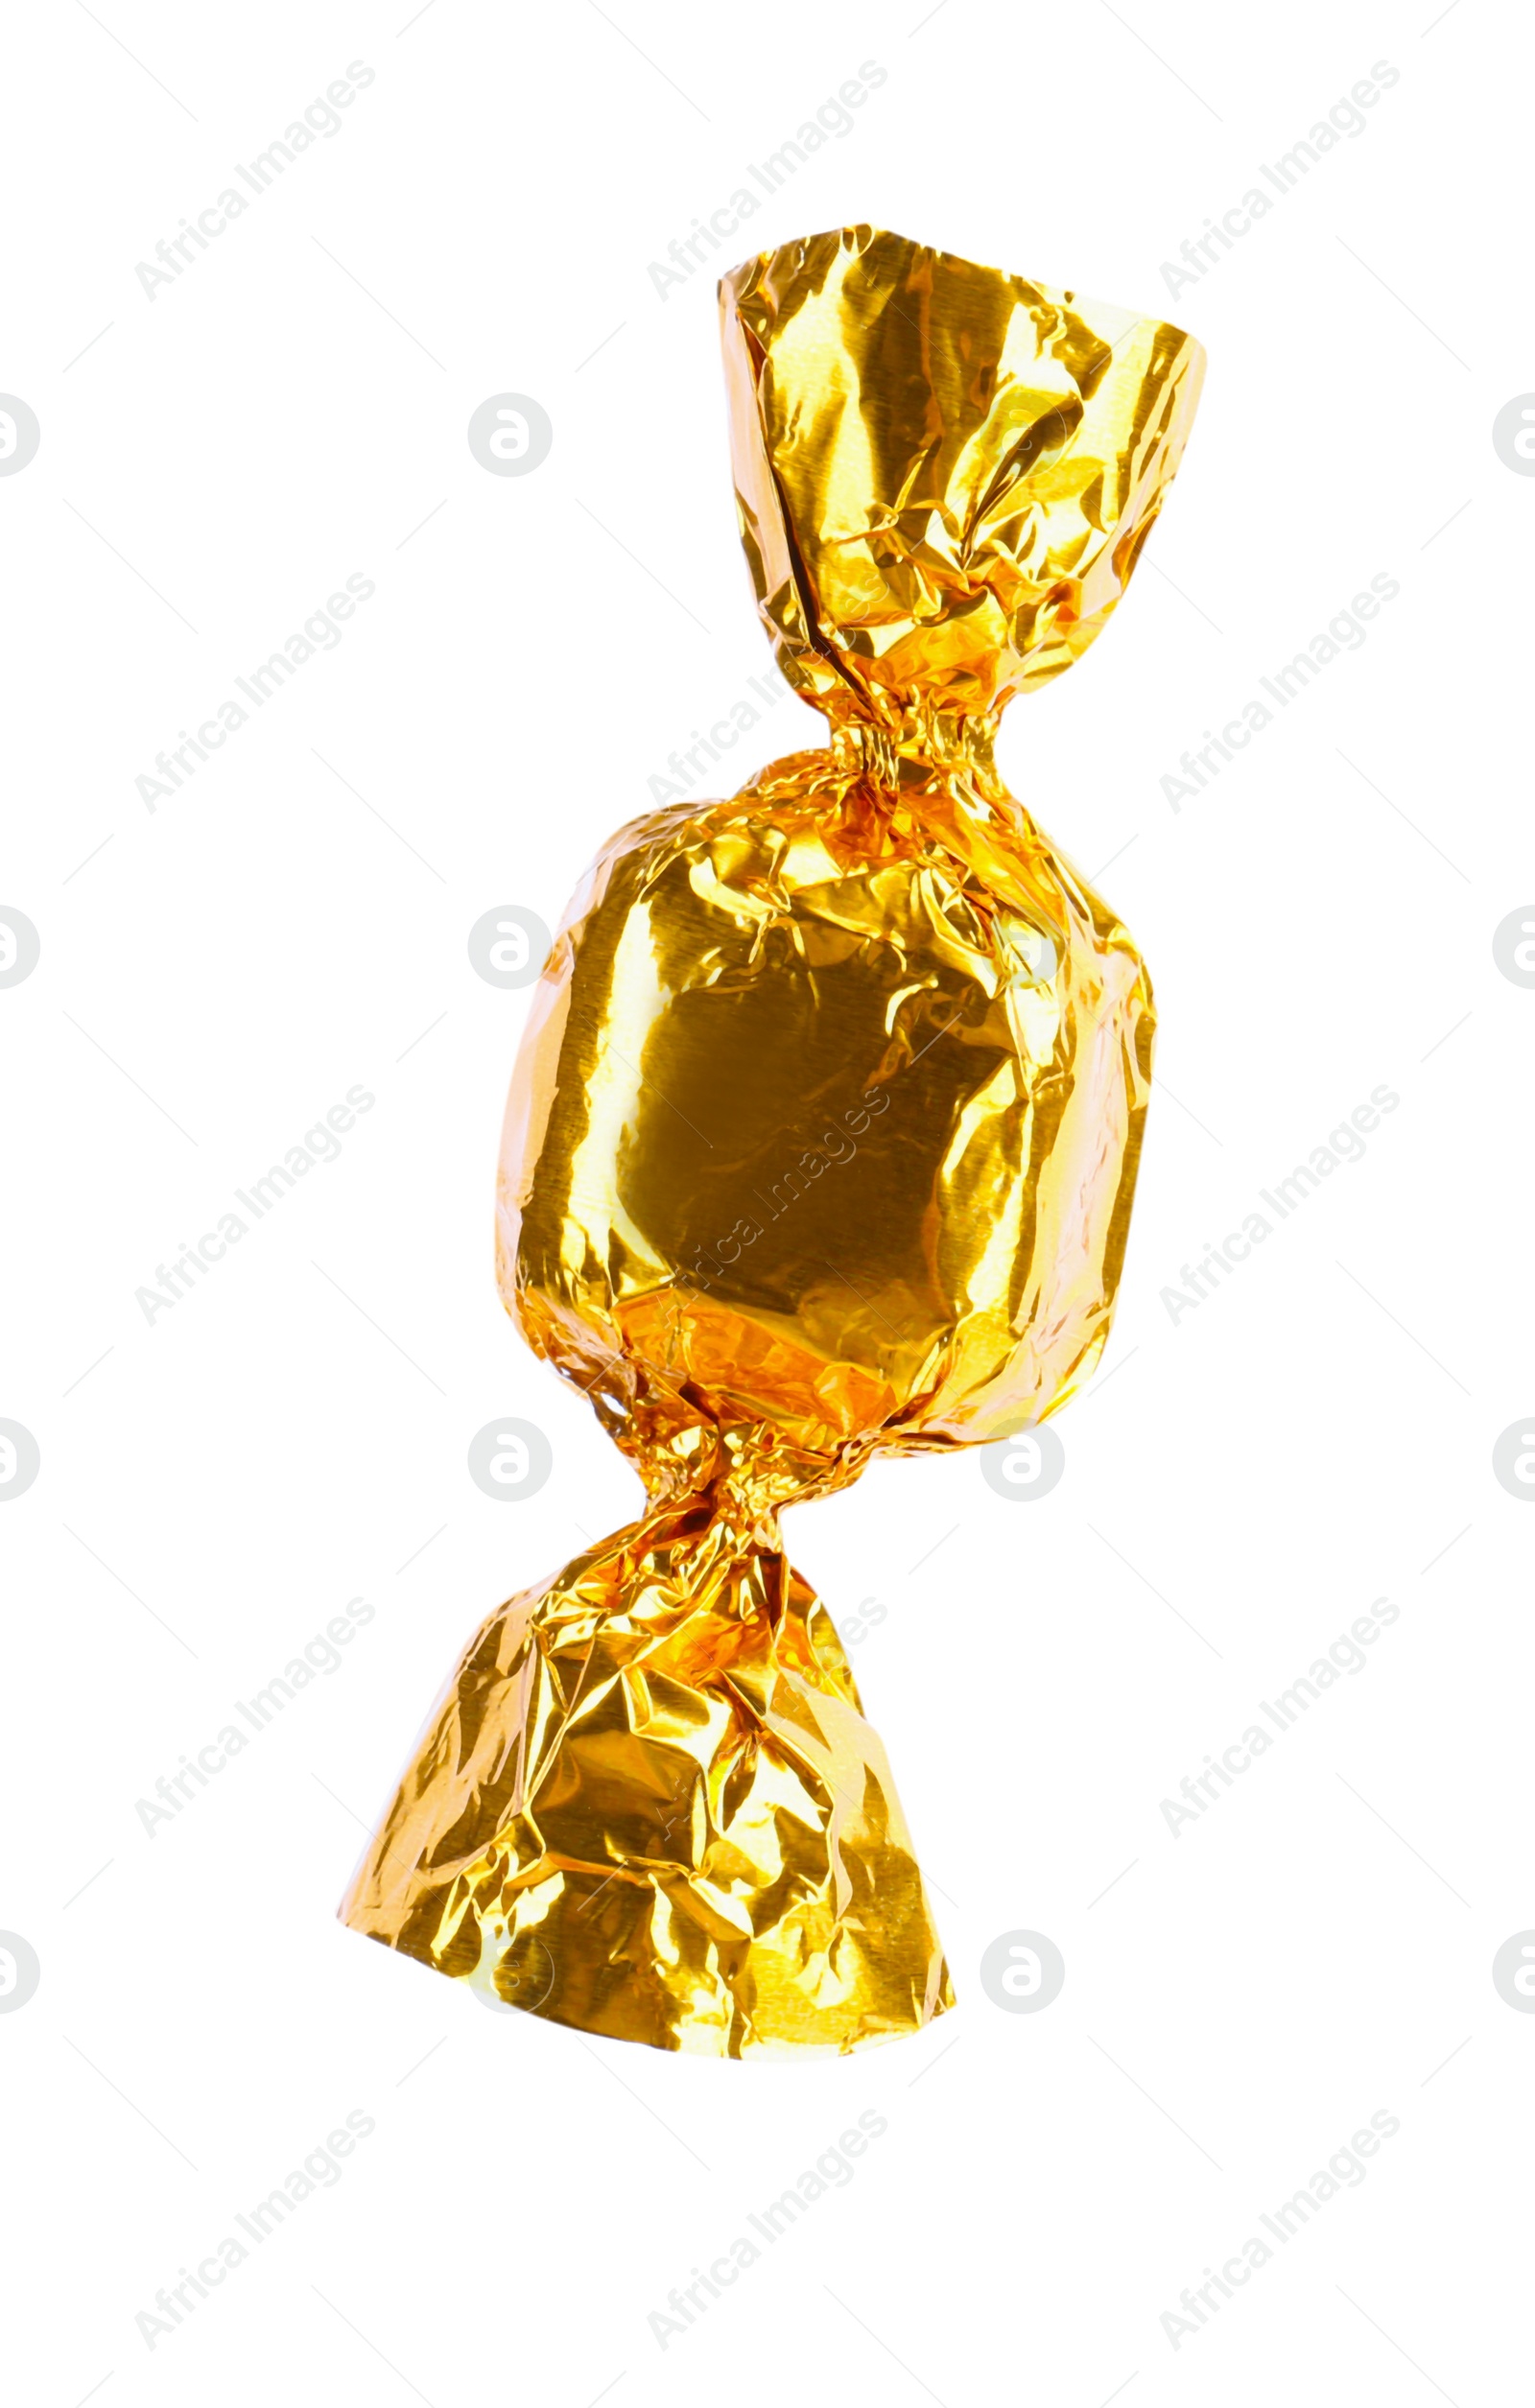 Photo of Tasty candy in golden wrapper isolated on white